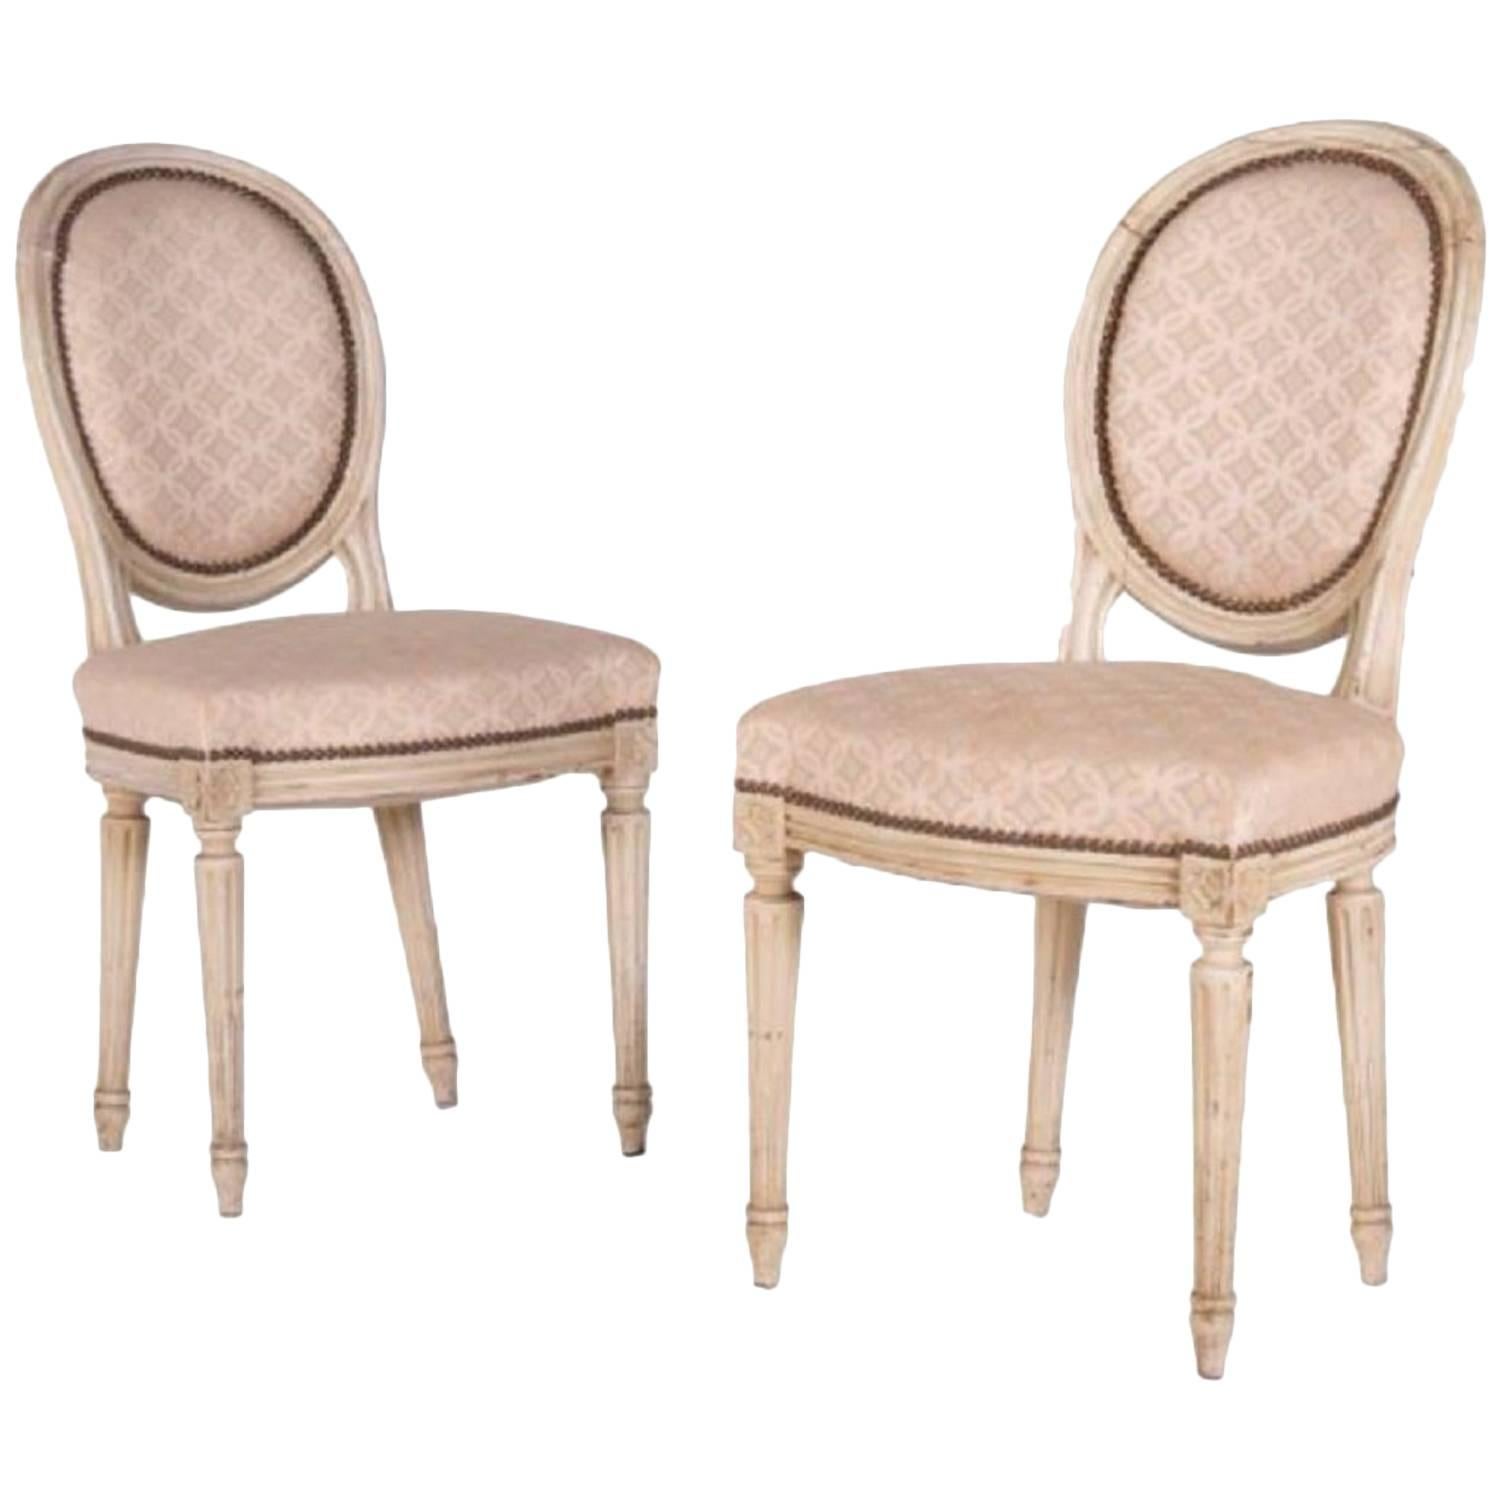 Two Elegant Antique Chairs from France in Louis XVI Style, circa 1860 For Sale